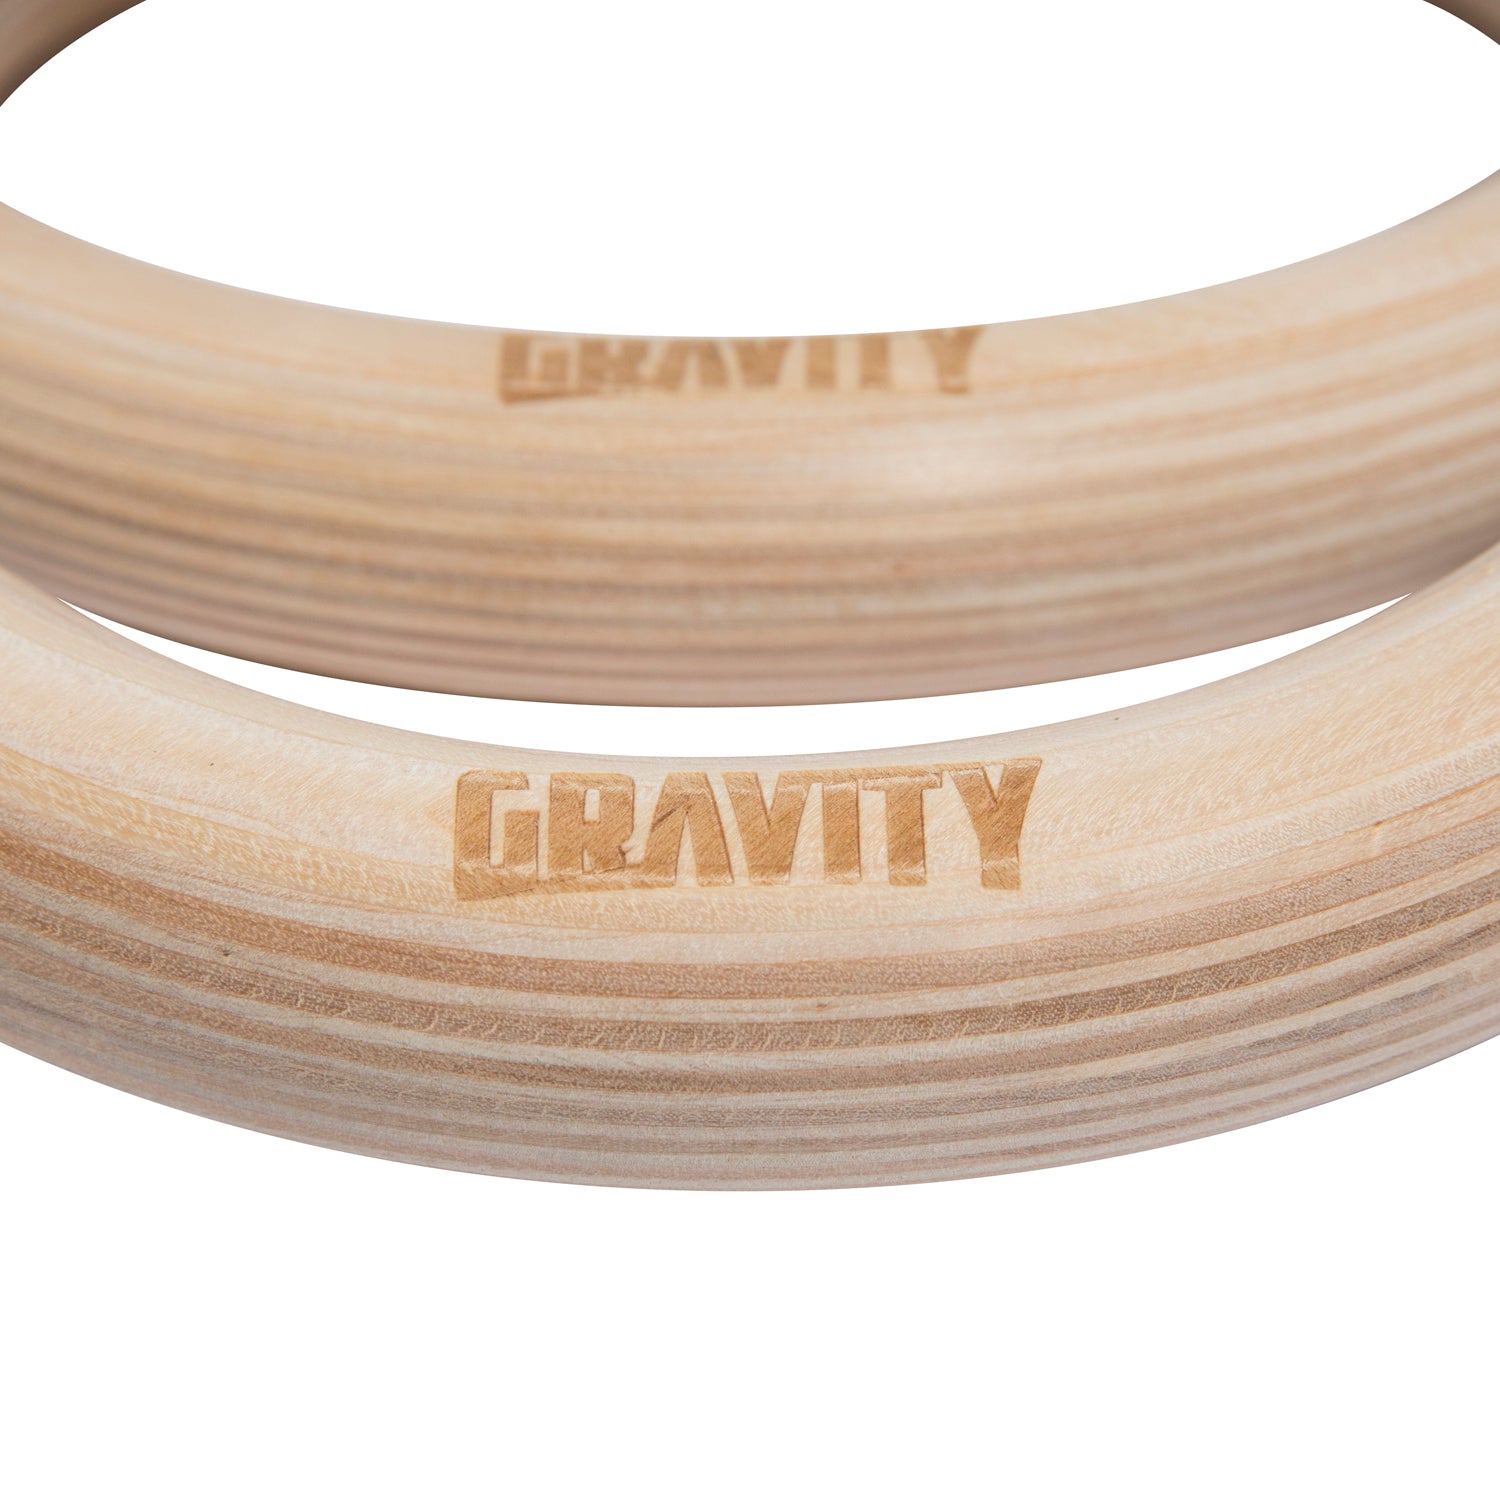 Gymnastic Rings: Wood or Plastic? - Gravity Fitness Equipment